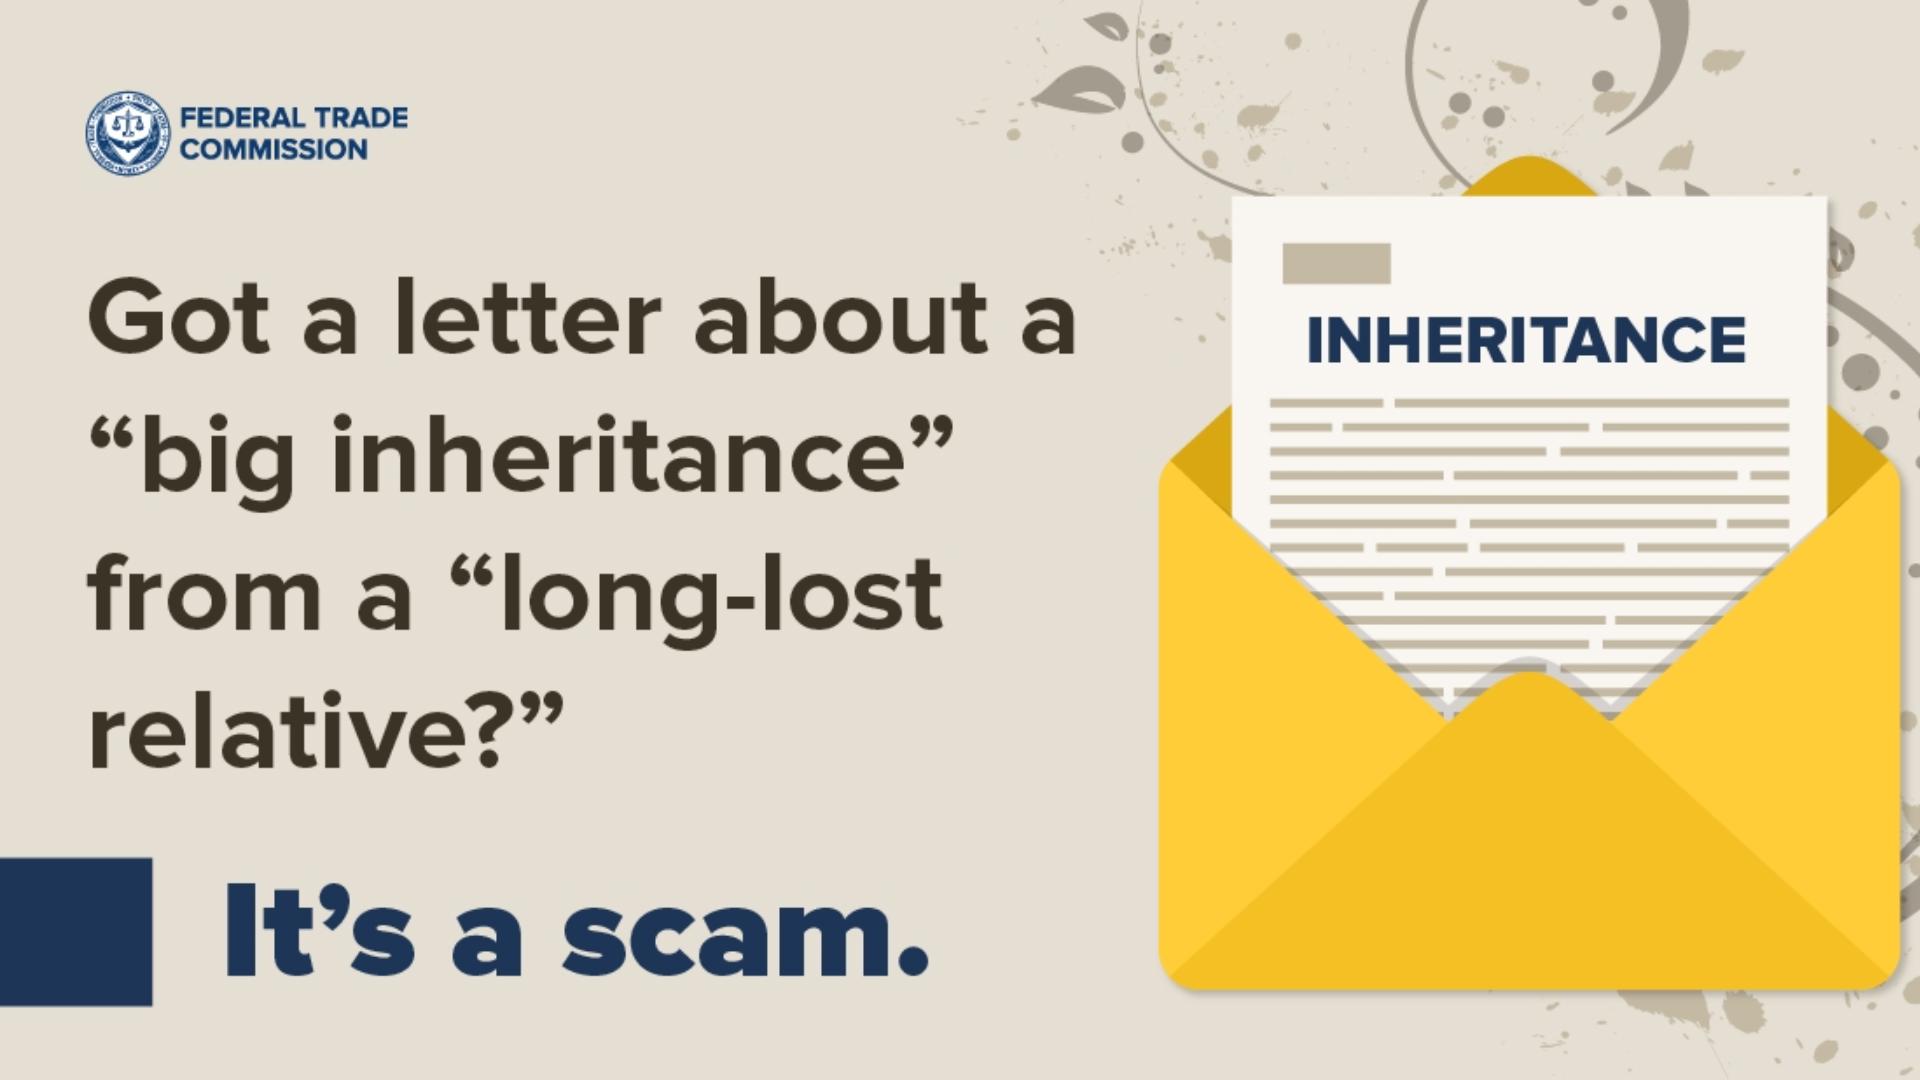 A Jacksonville woman received a letter that a dead relative's life insurance policy was unclaimed. She contacted the Ask Anthony team about the possible scam.